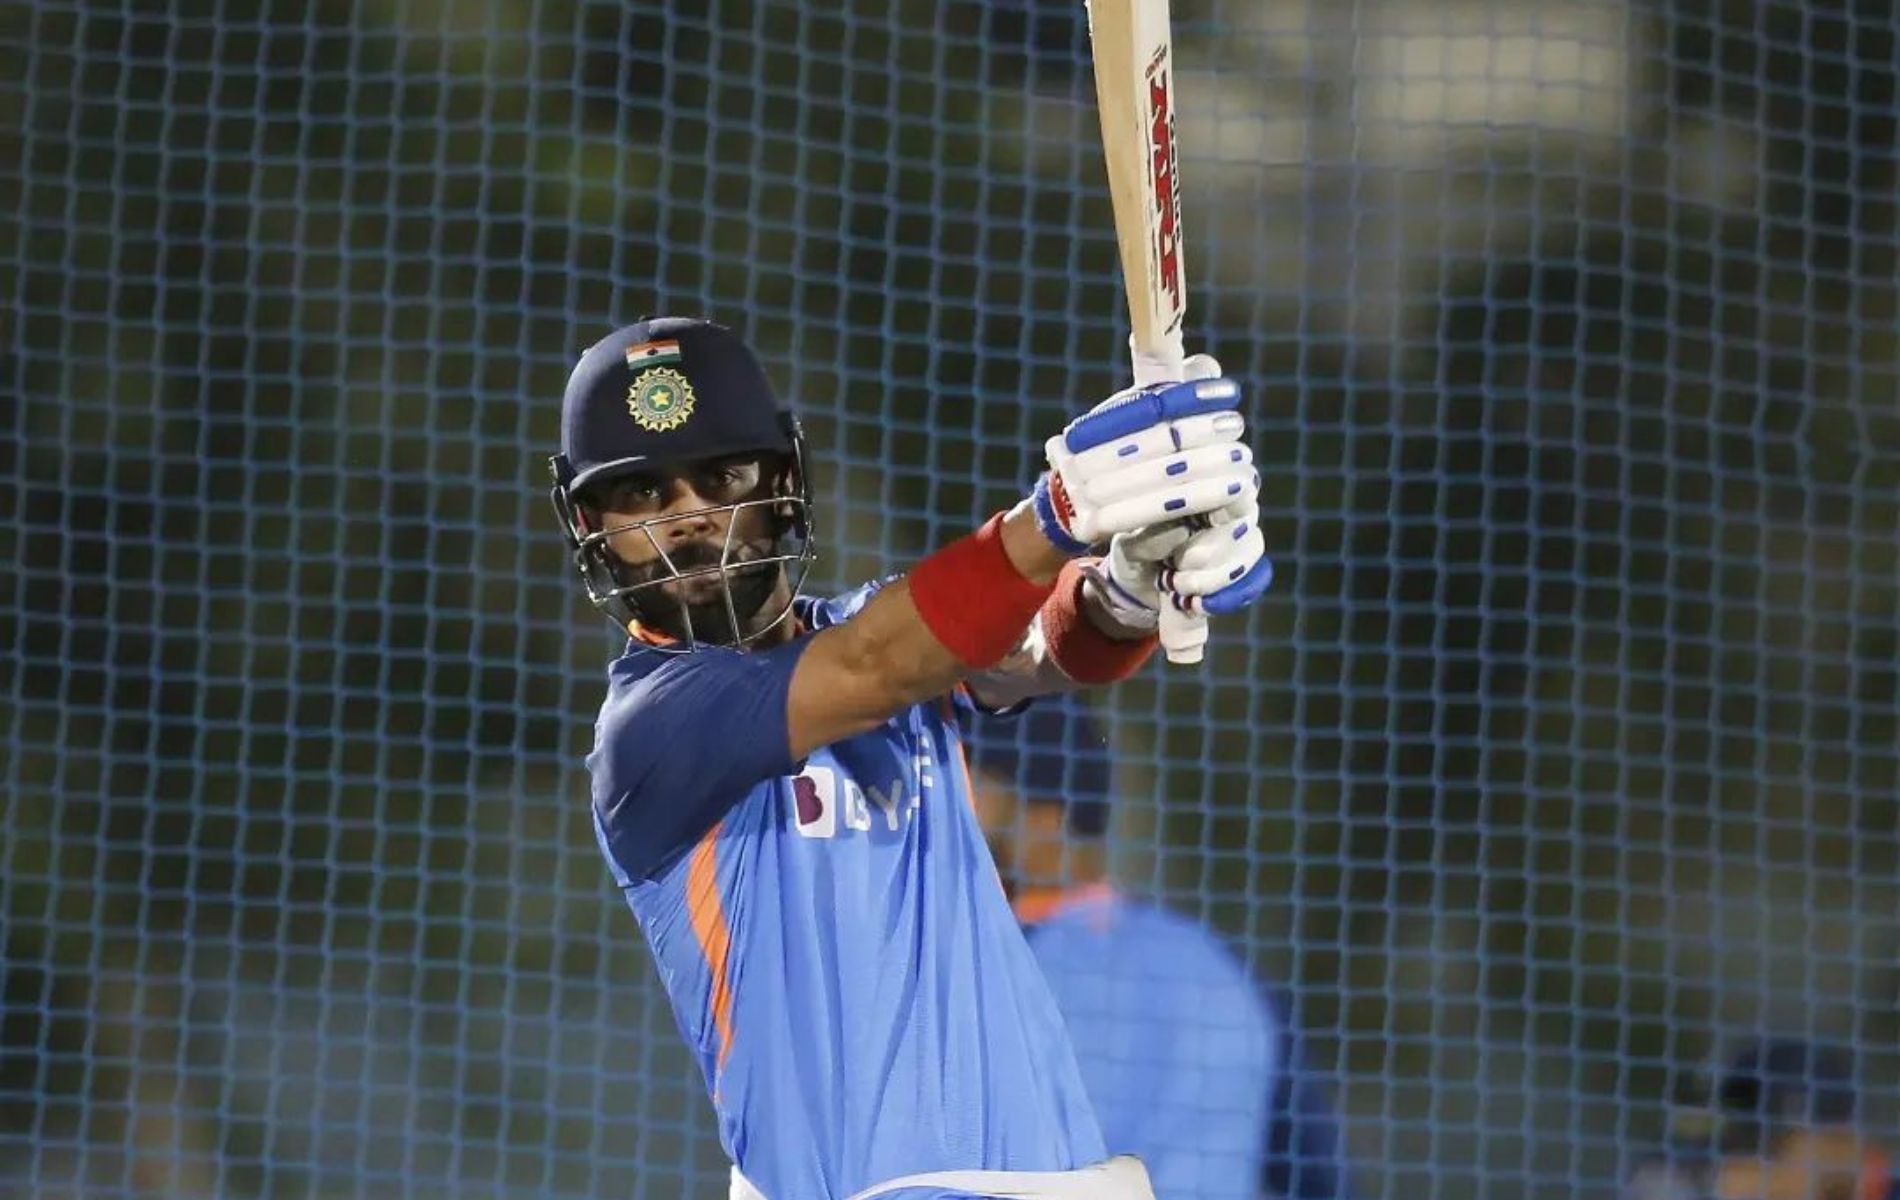 Virat Kohli is set to return to cricketing action at the Asia Cup. (Pic: Instagram)